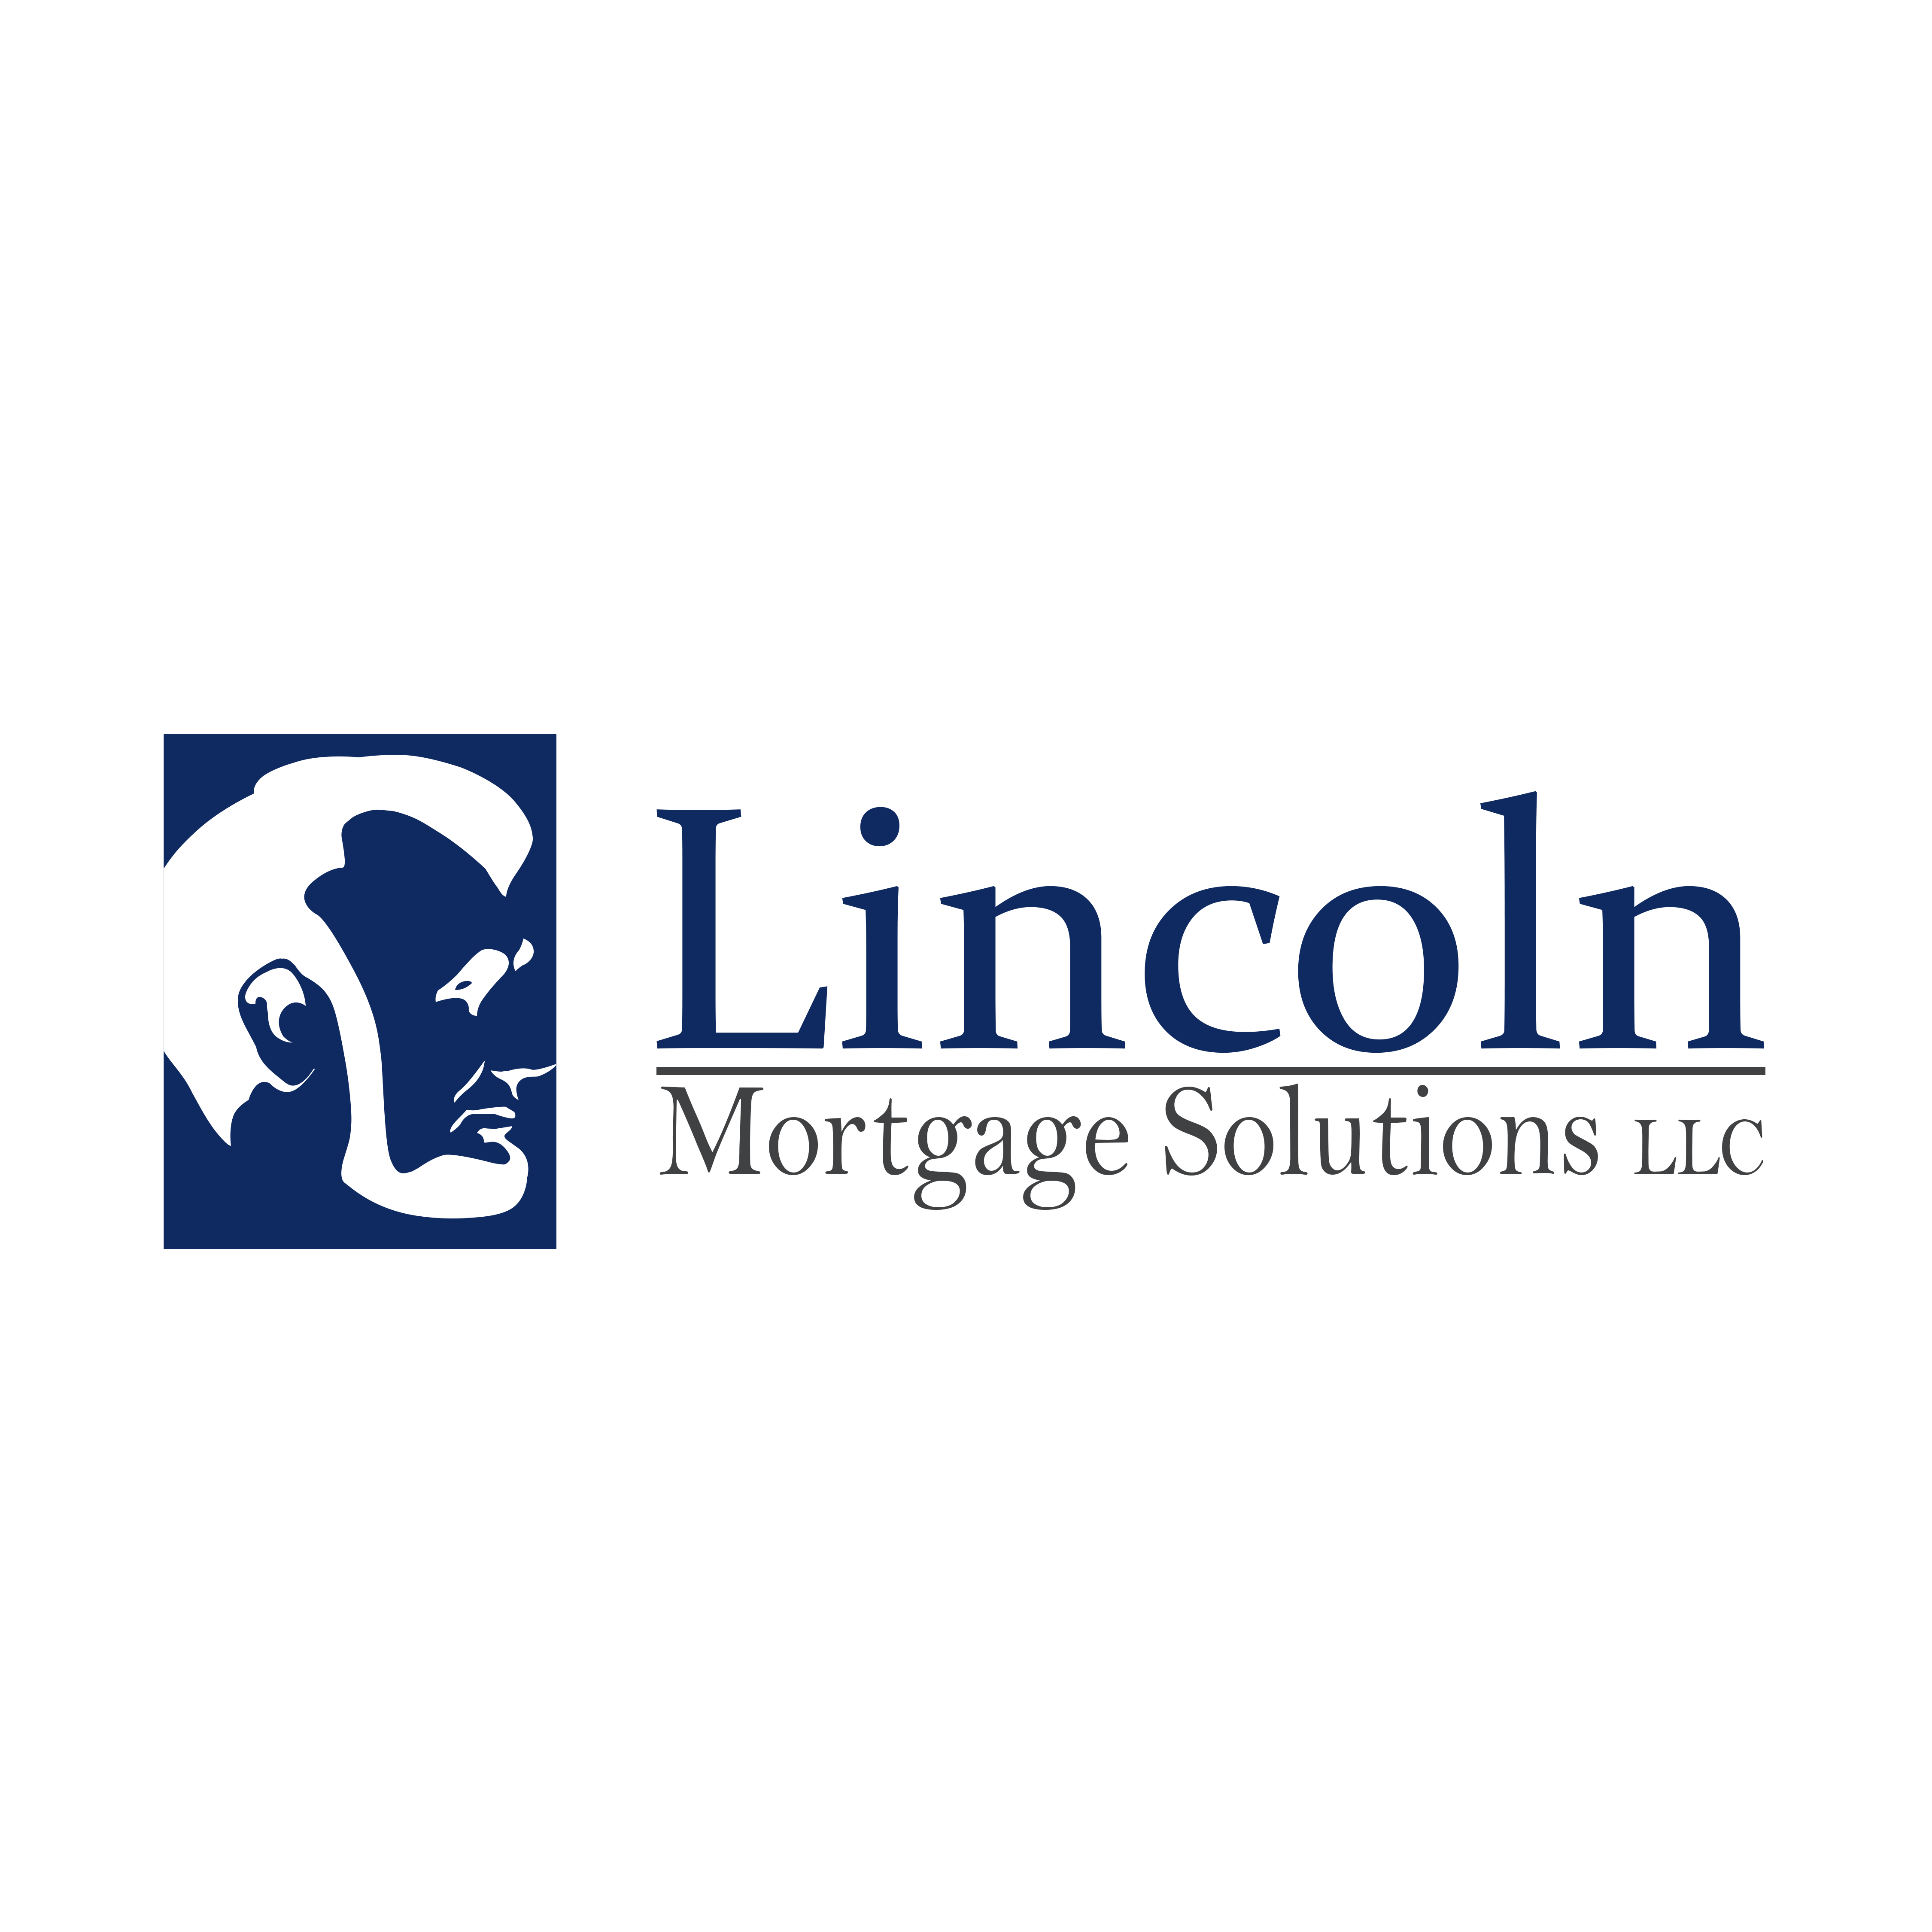 Lincoln Mortgage Solutions LLC Photo